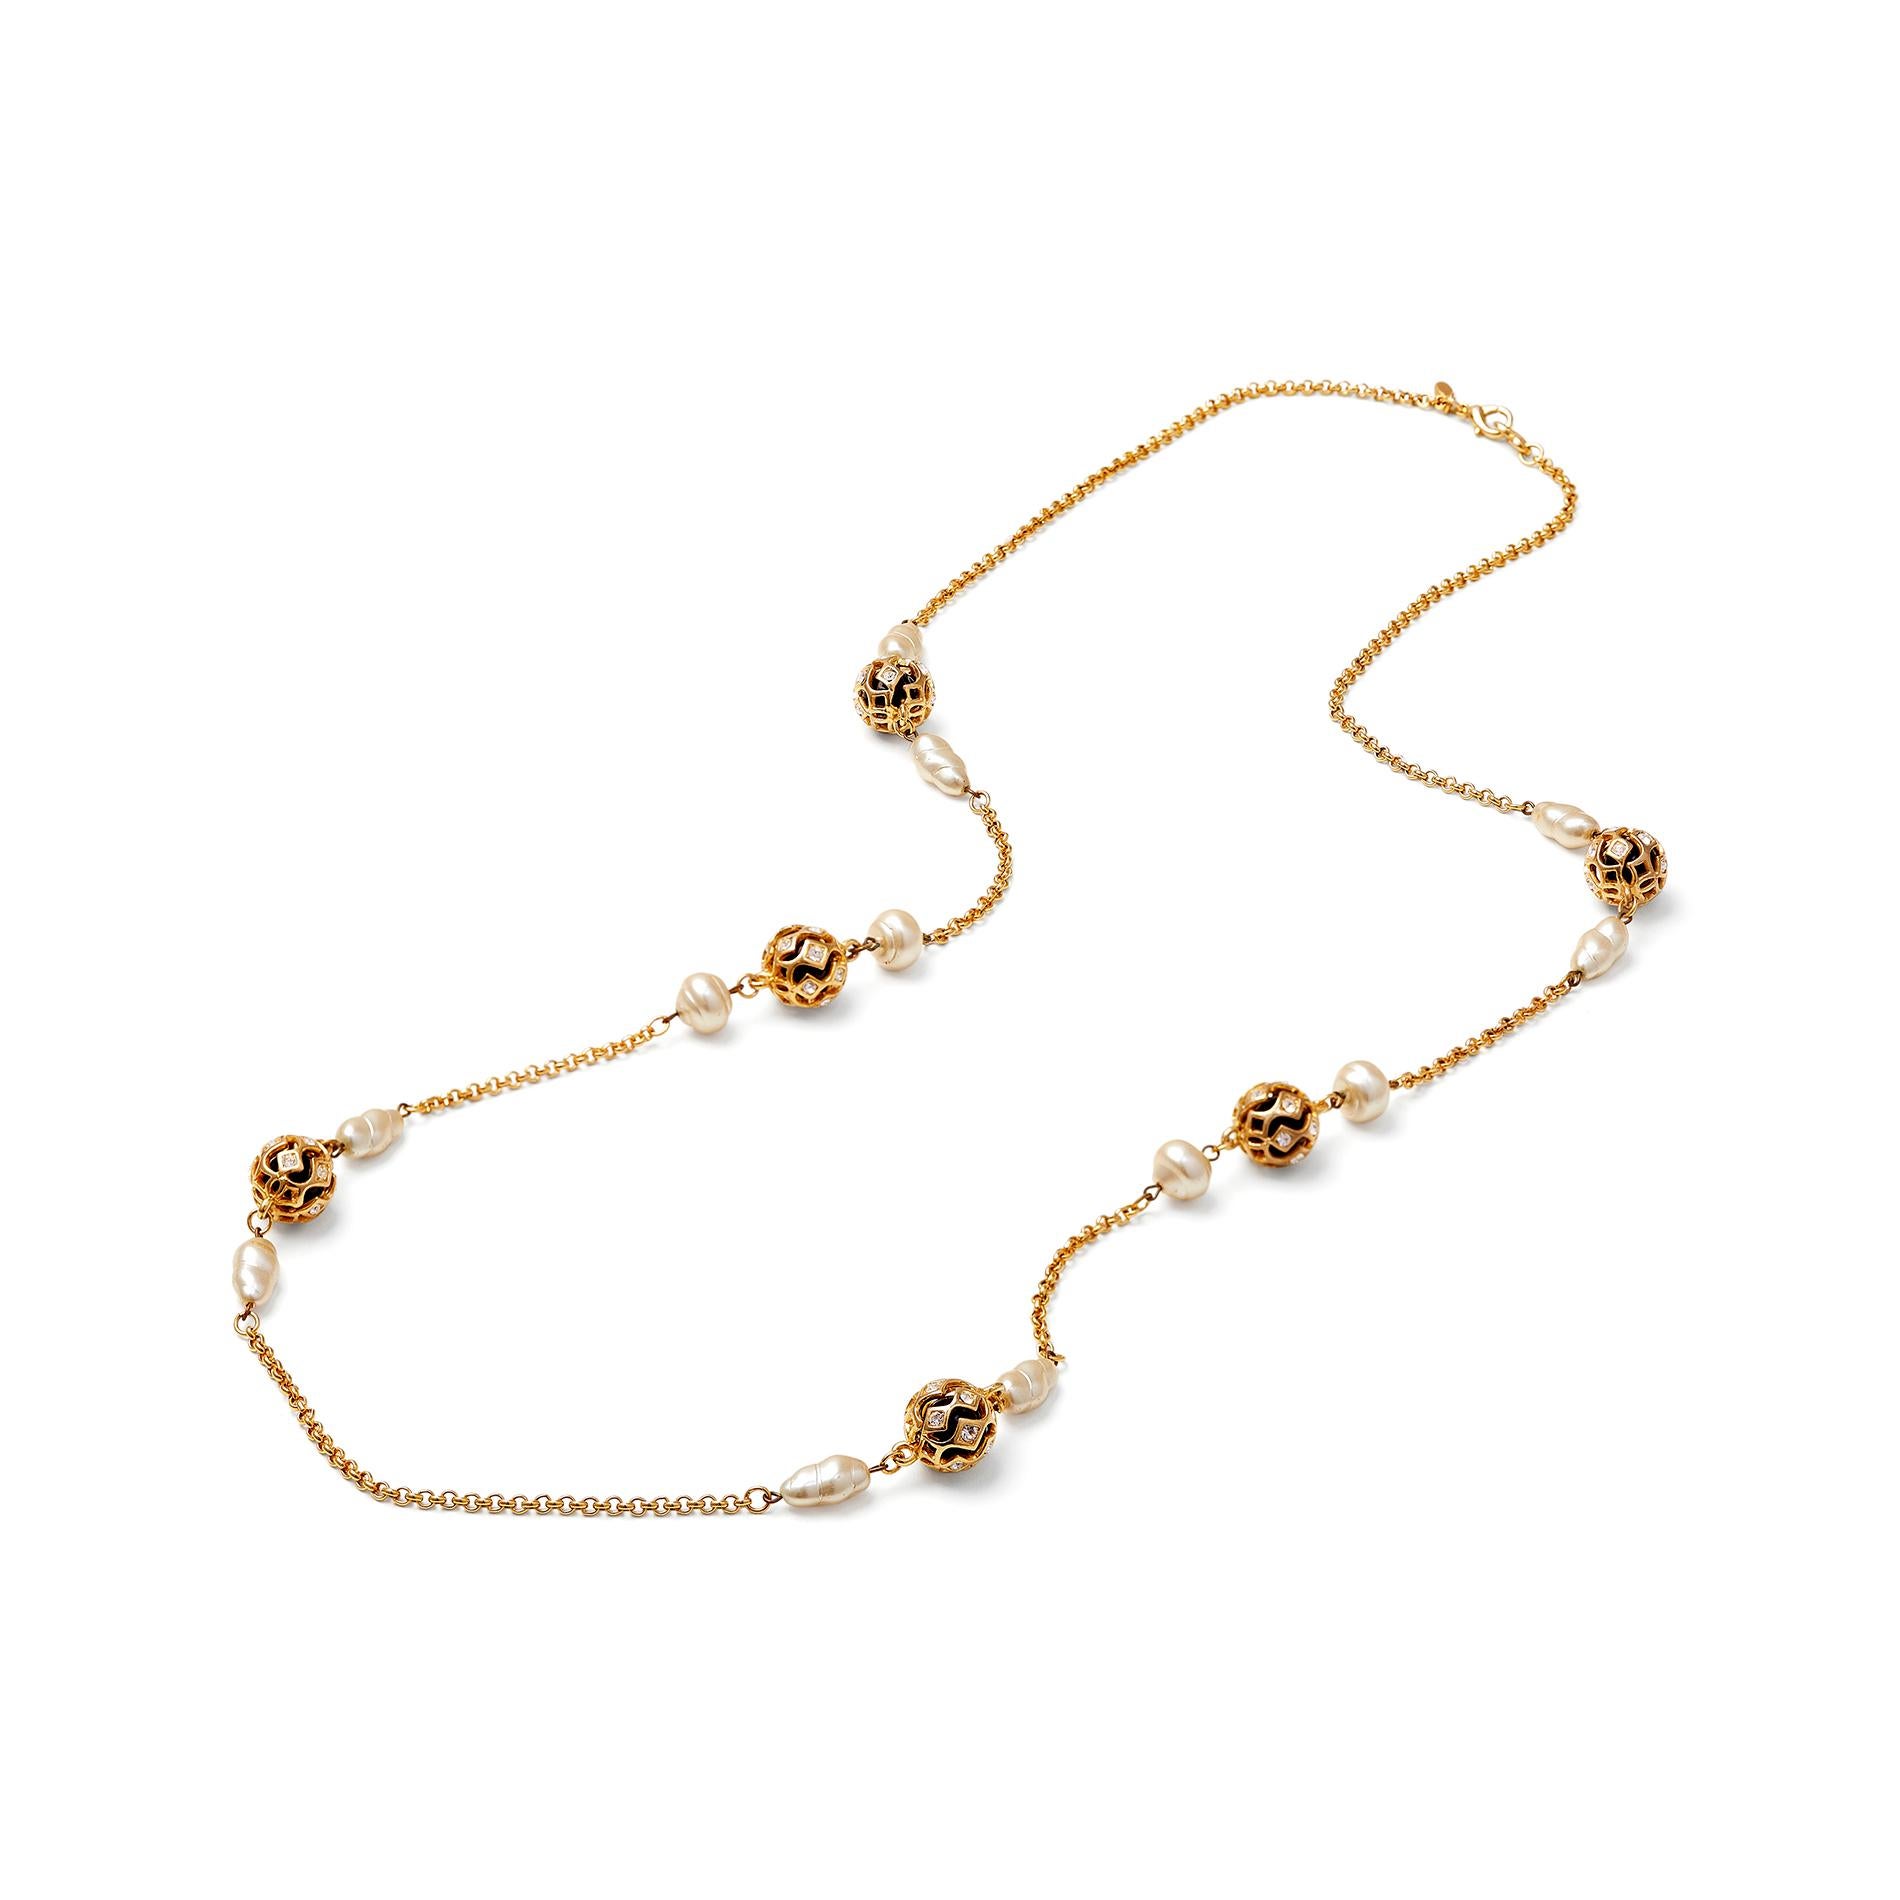 This vintage early 1990s Kenneth Jay Lane necklace features a repeat of bead clusters on a long gold coloured chain, finished with a sturdy clasp and the 'Kenneth Lane' cartouche.  Each cluster is made up of two imitation pearls, each flanking a